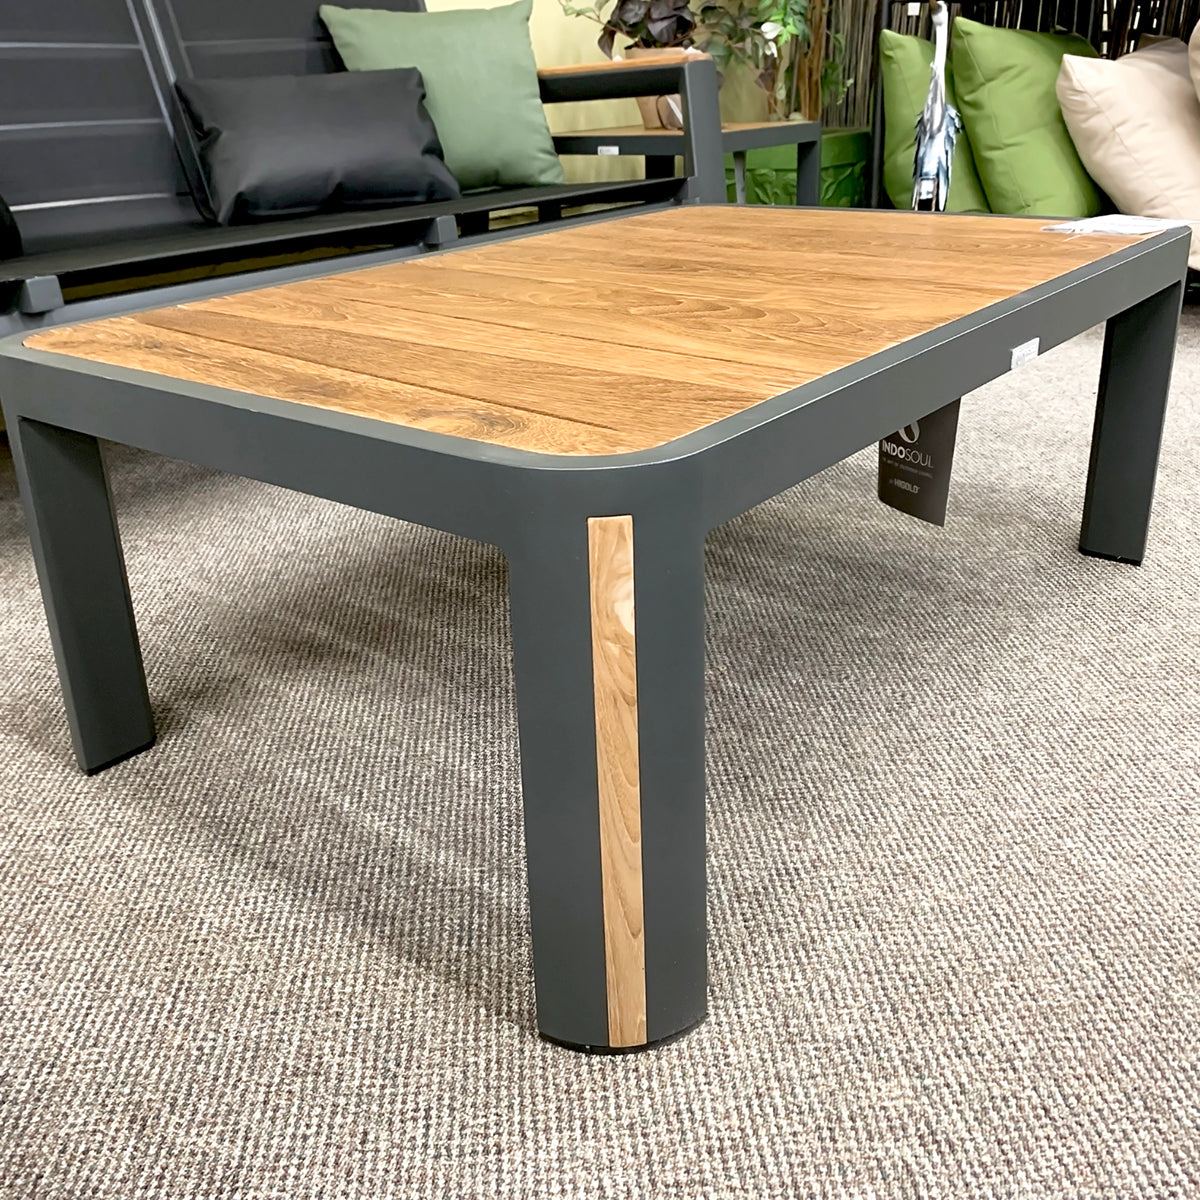 IndoSoul Geneva Outdoor Patio Coffee Table With Full Teak Top in our Jacobs Custom Living Spokane Valley showroom.